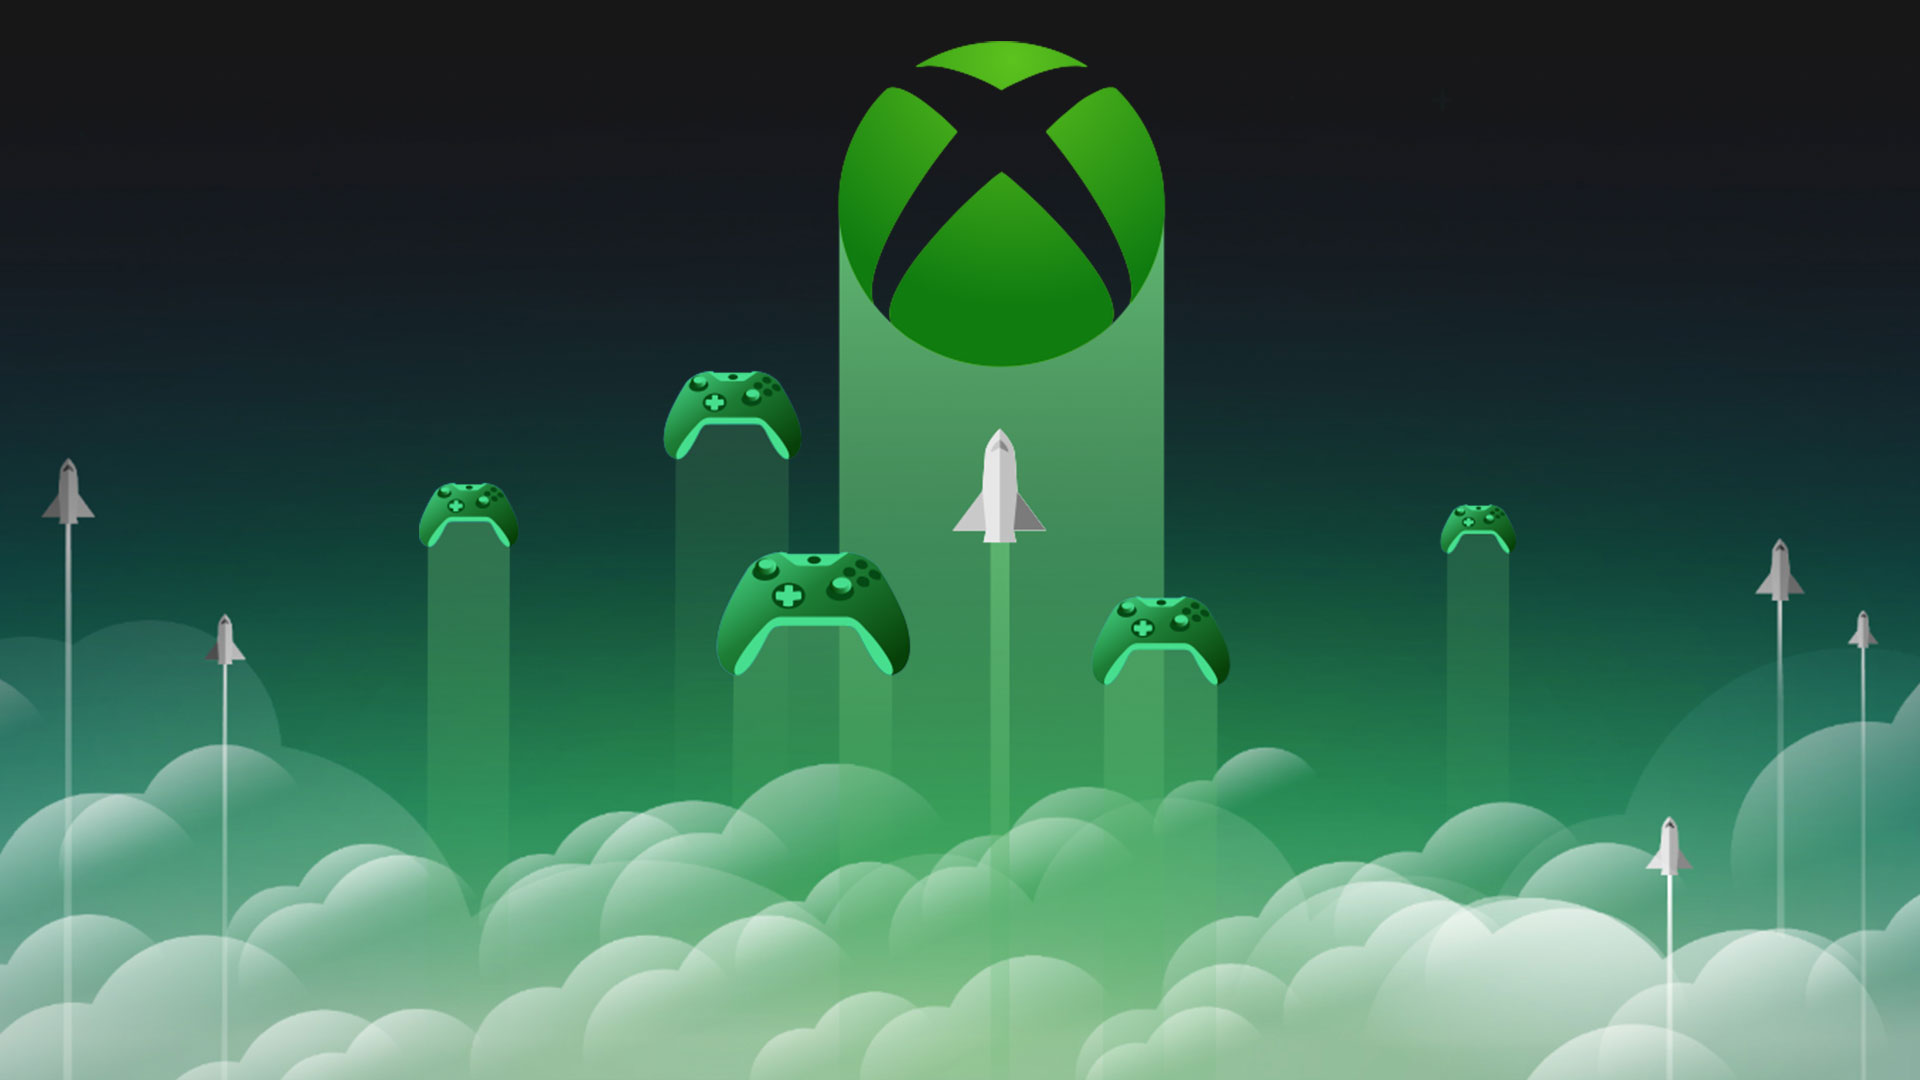 Xbox Cloud Gaming service launches in Australia